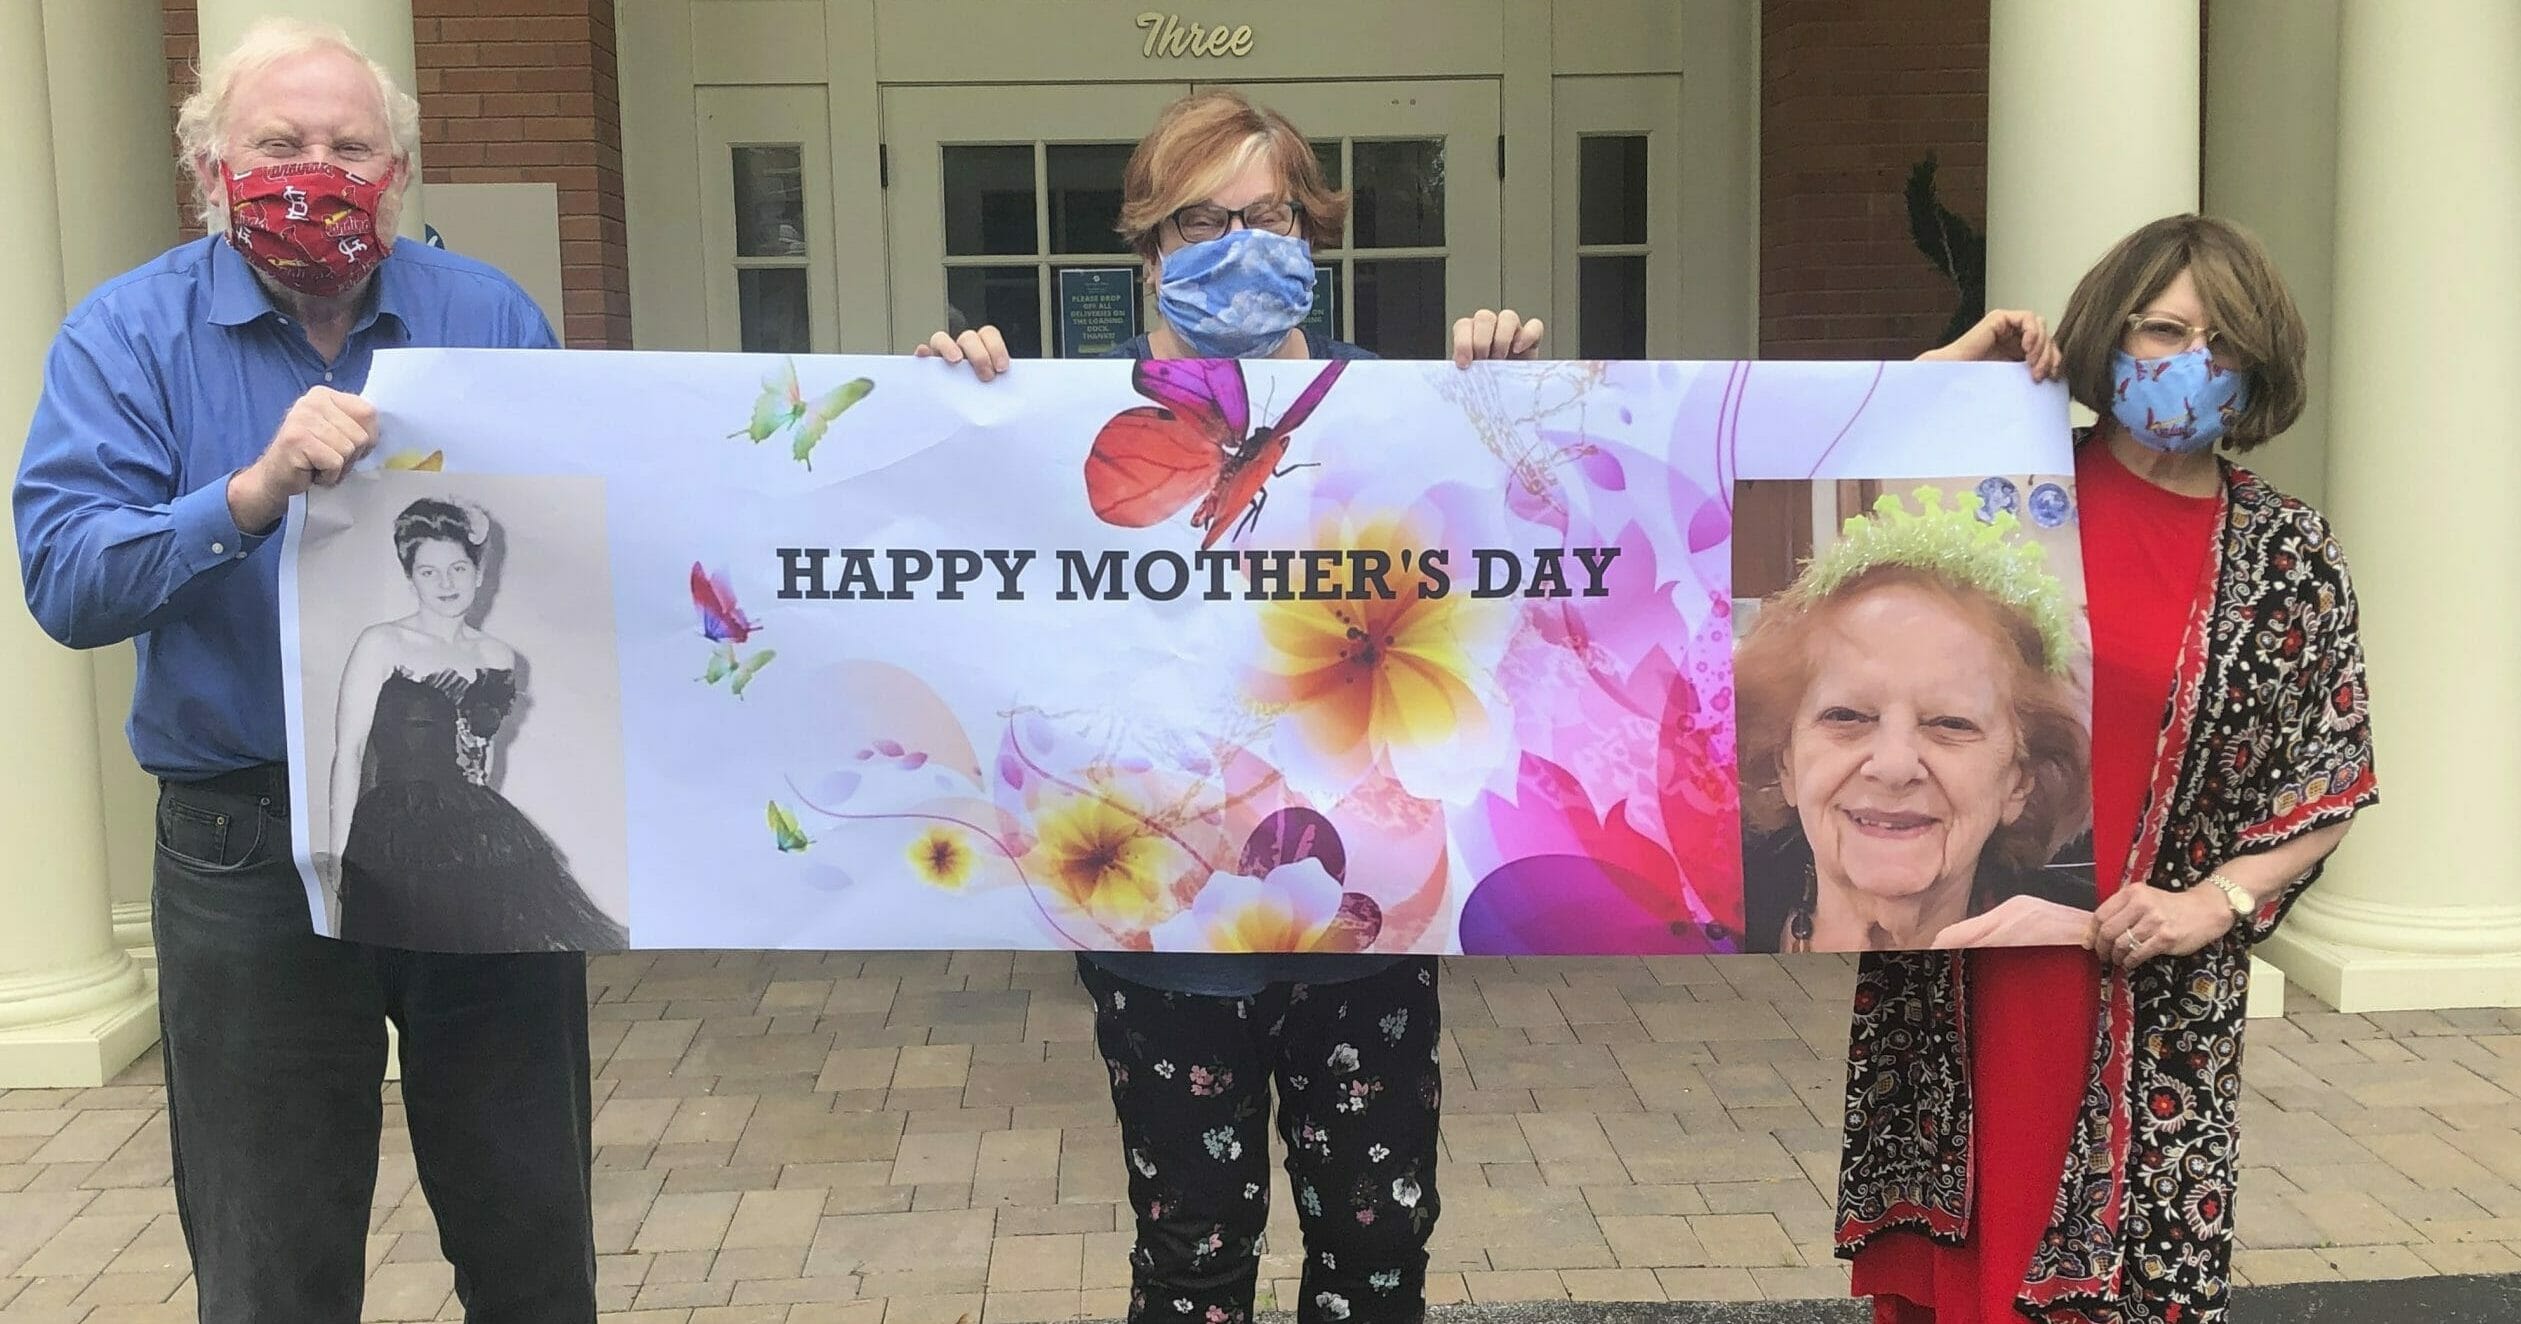 This May 3, 2020, photo released by Shelly Solomon shows, from left, Steve Turner and his sisters, Carla Paull and Lisa Fishman, holding up a Mother’s Day banner emblazoned with images of their mom, Beverly Turner, in front of her assisted living facility in Ladue, Missouri.